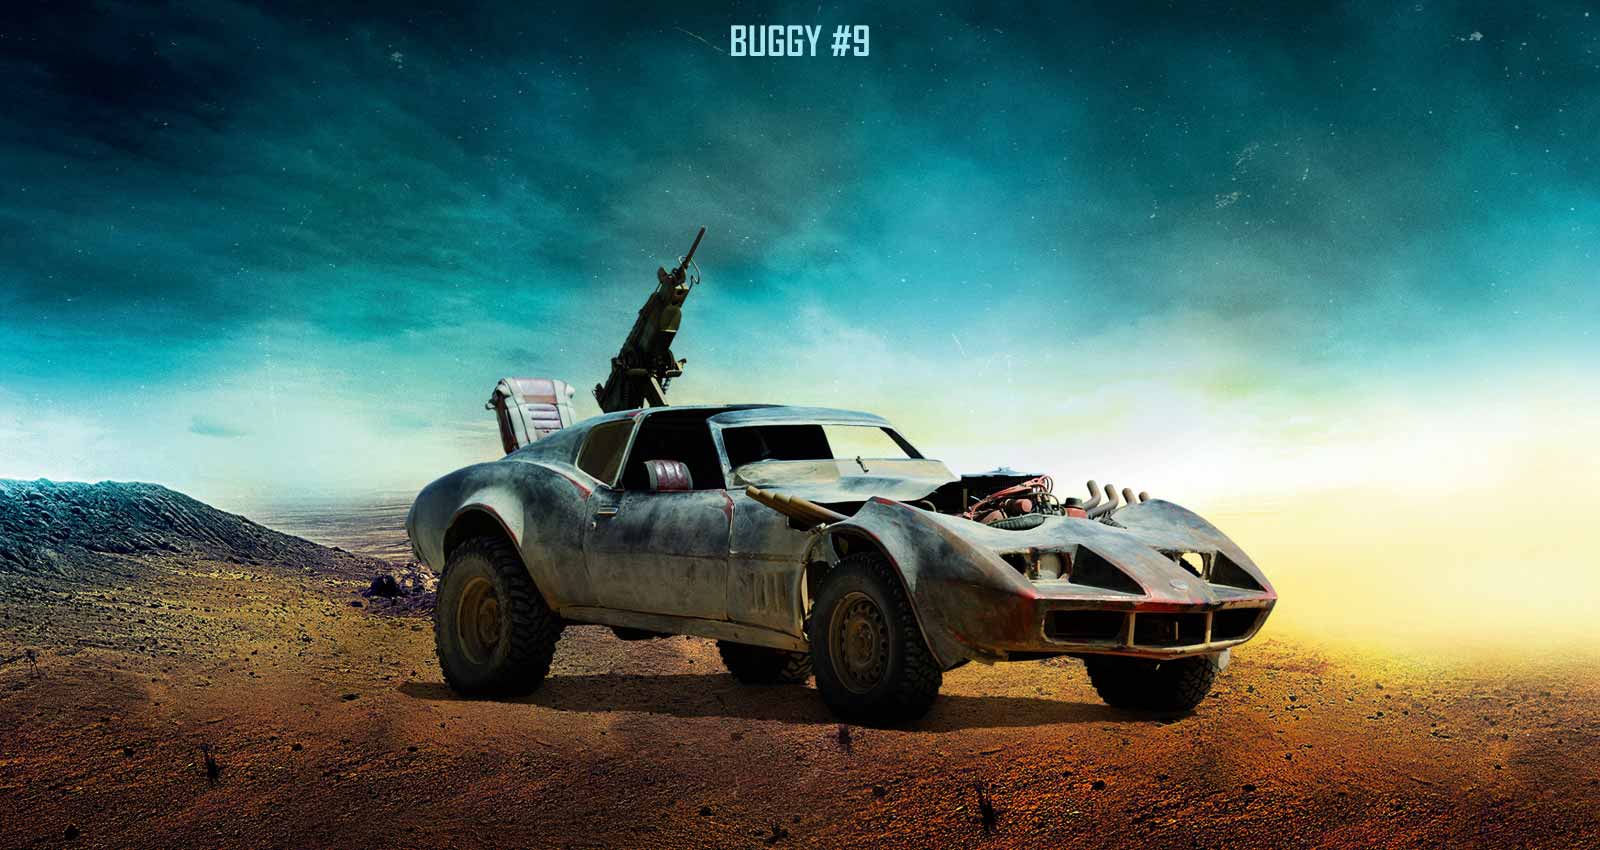 mad-max-buggy-9